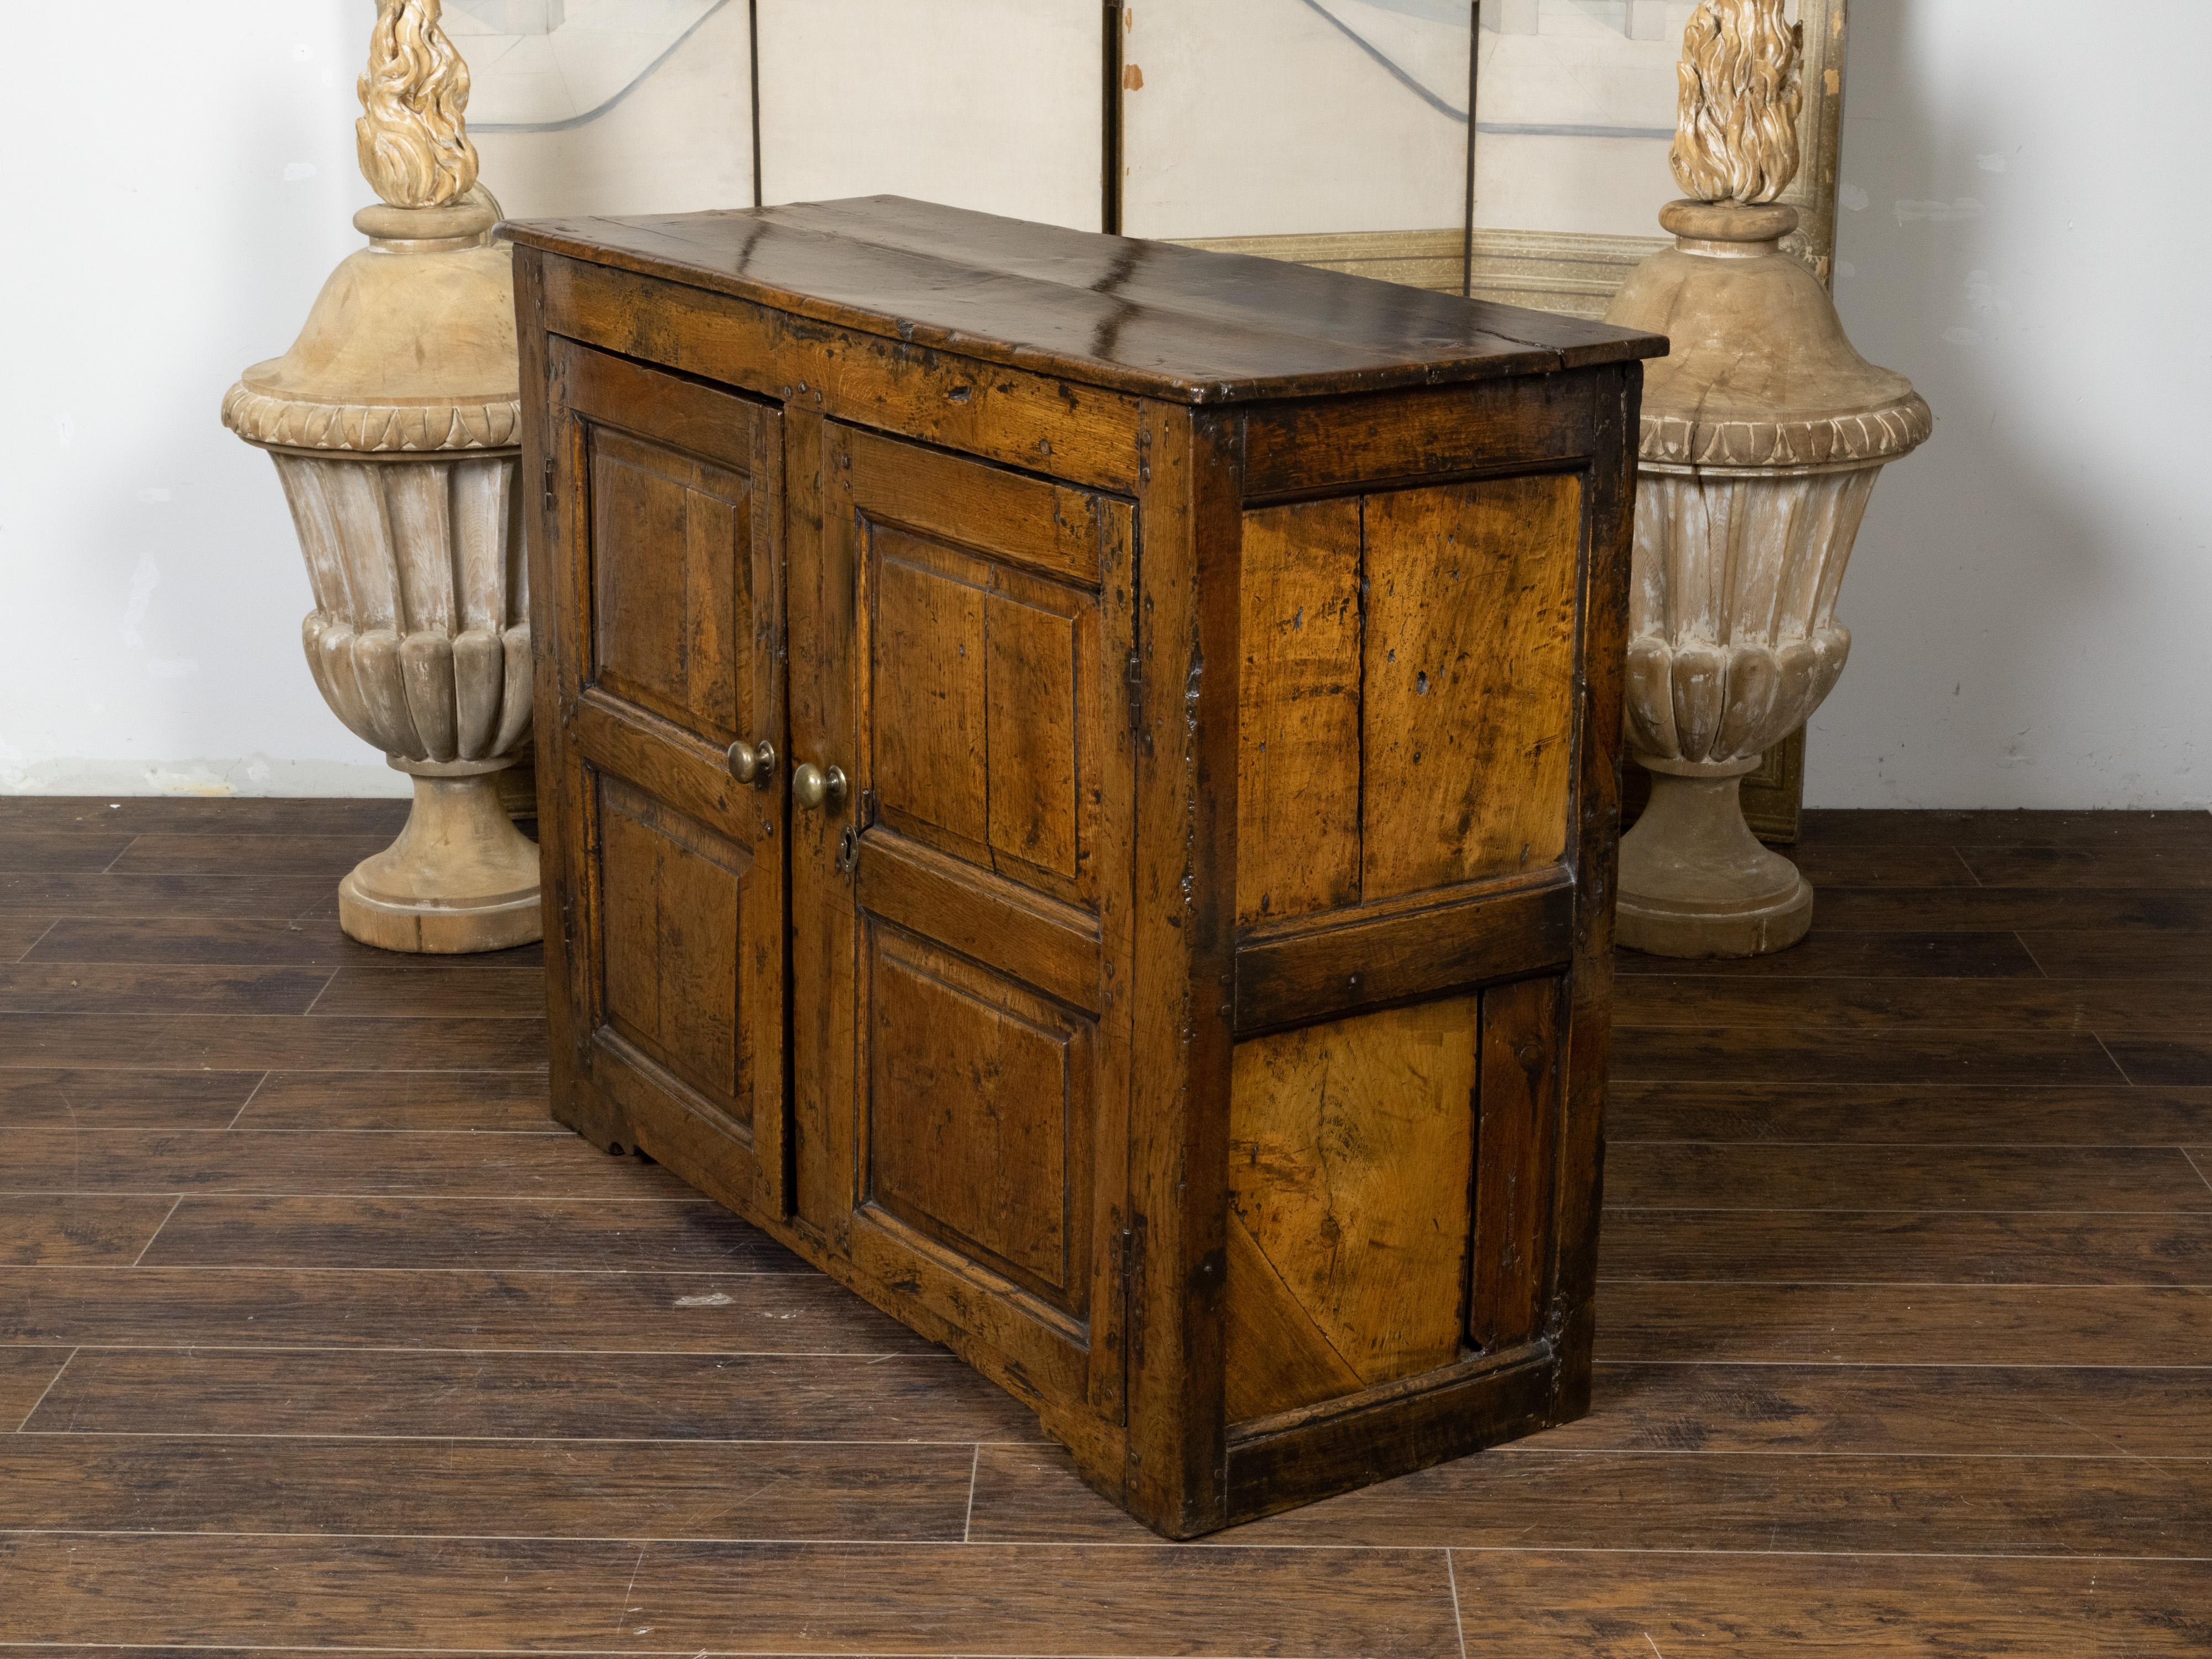 Carved English Early Oak Cupboard with Two Doors and Distressed Patina, 18th Century For Sale